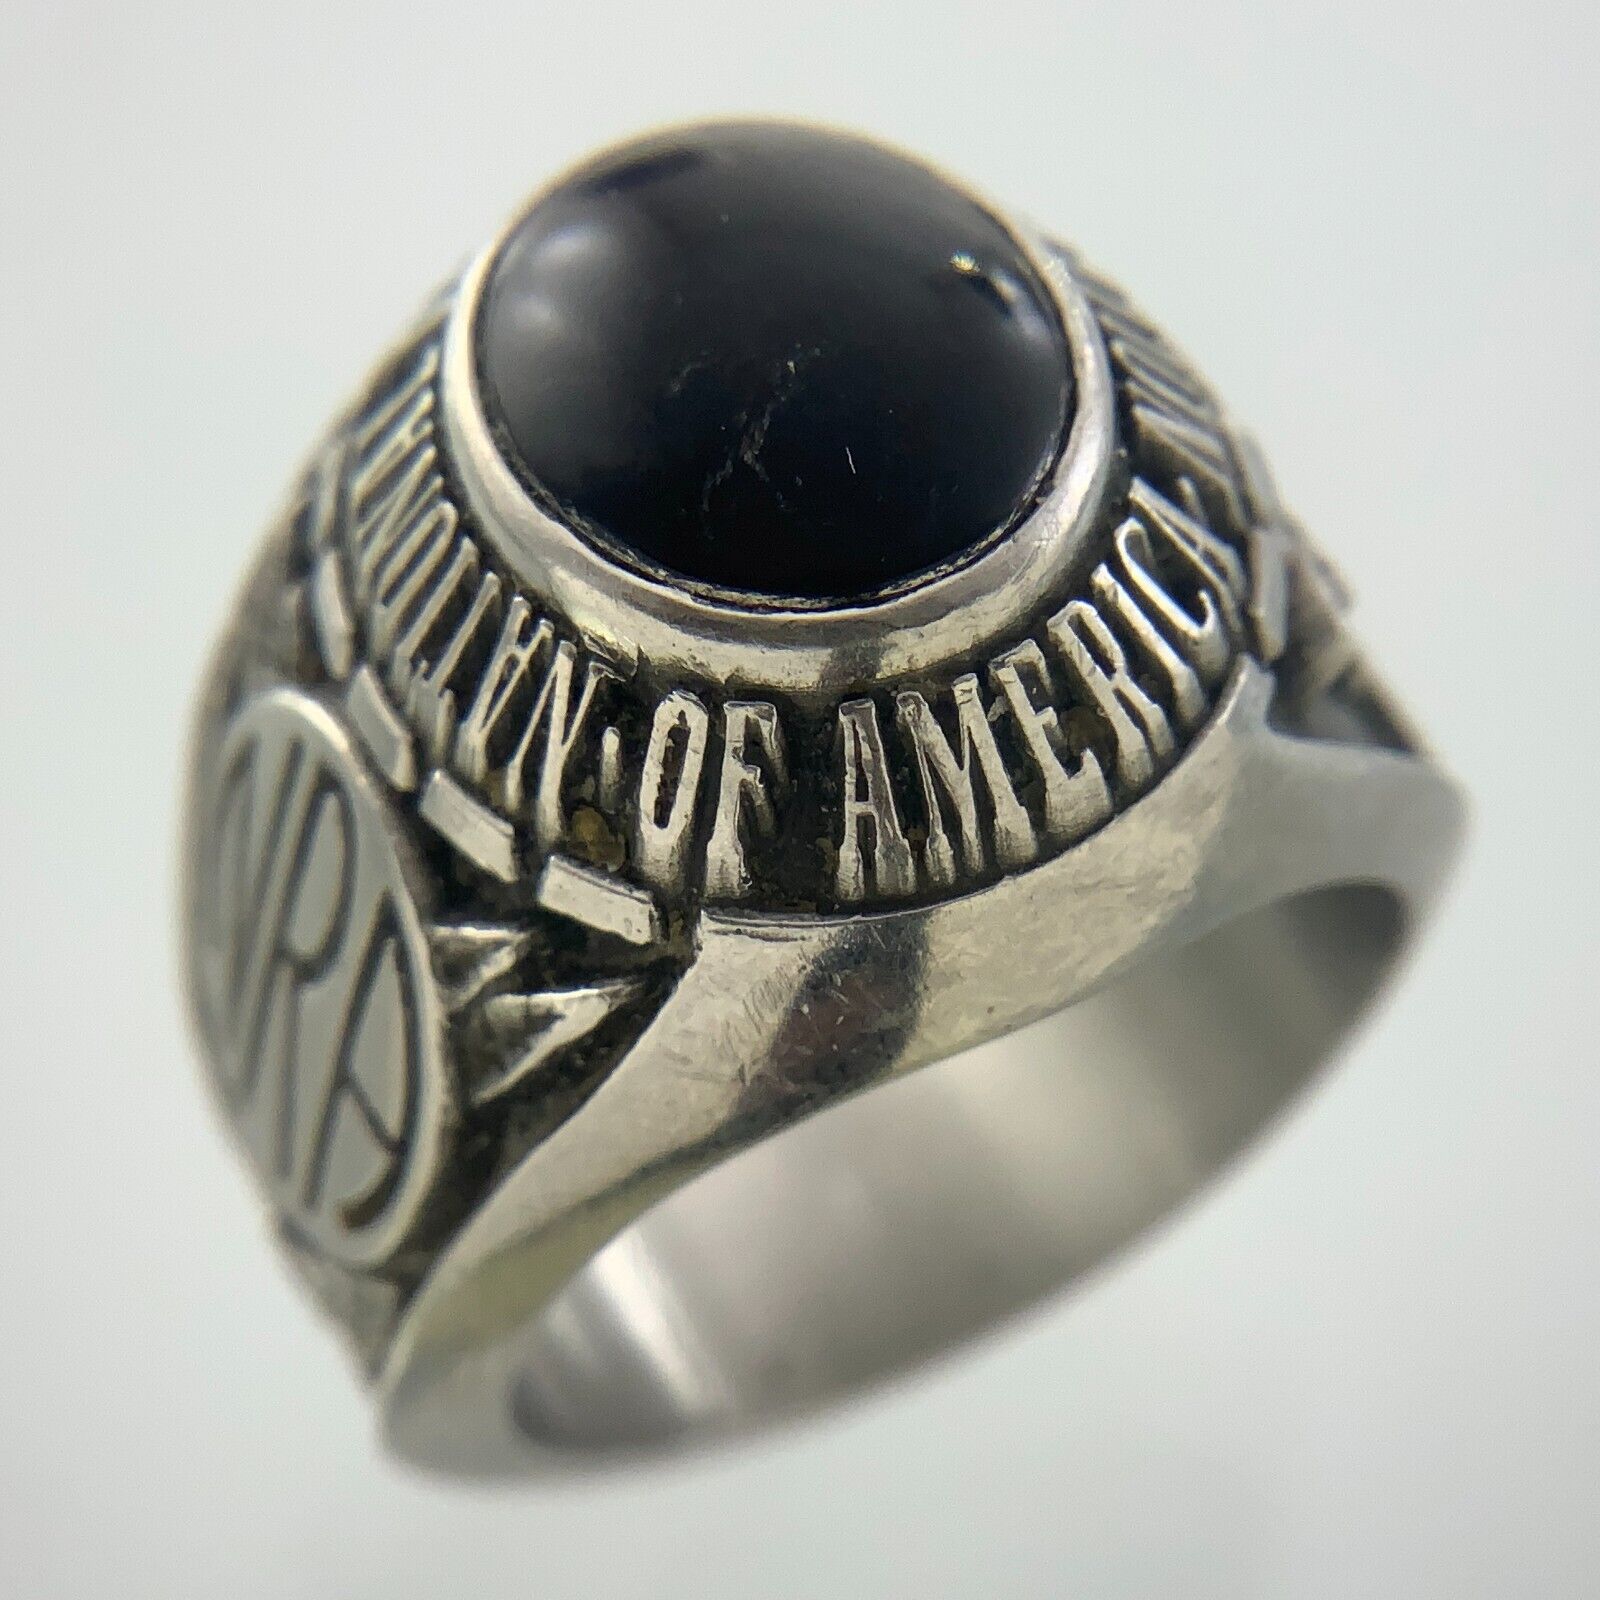 National Rifle Association of America NRA Ring Size 9.75 EE851